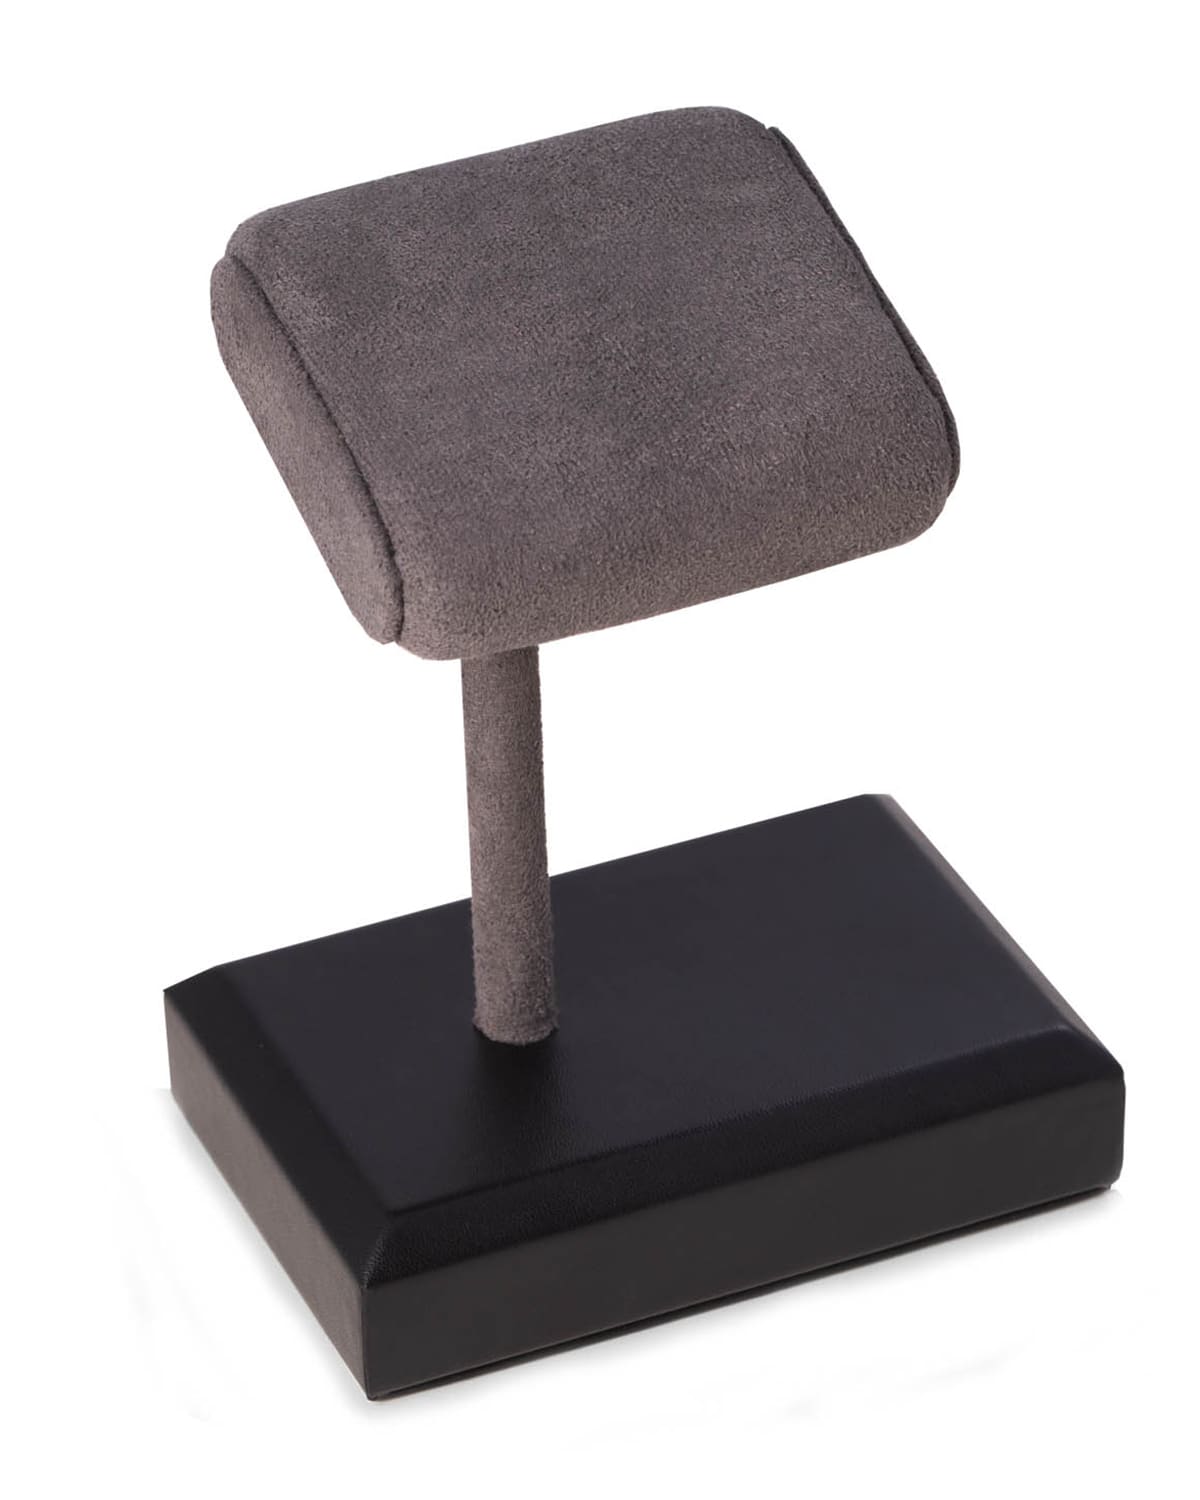 Men's Cushioned Watch Display Stand